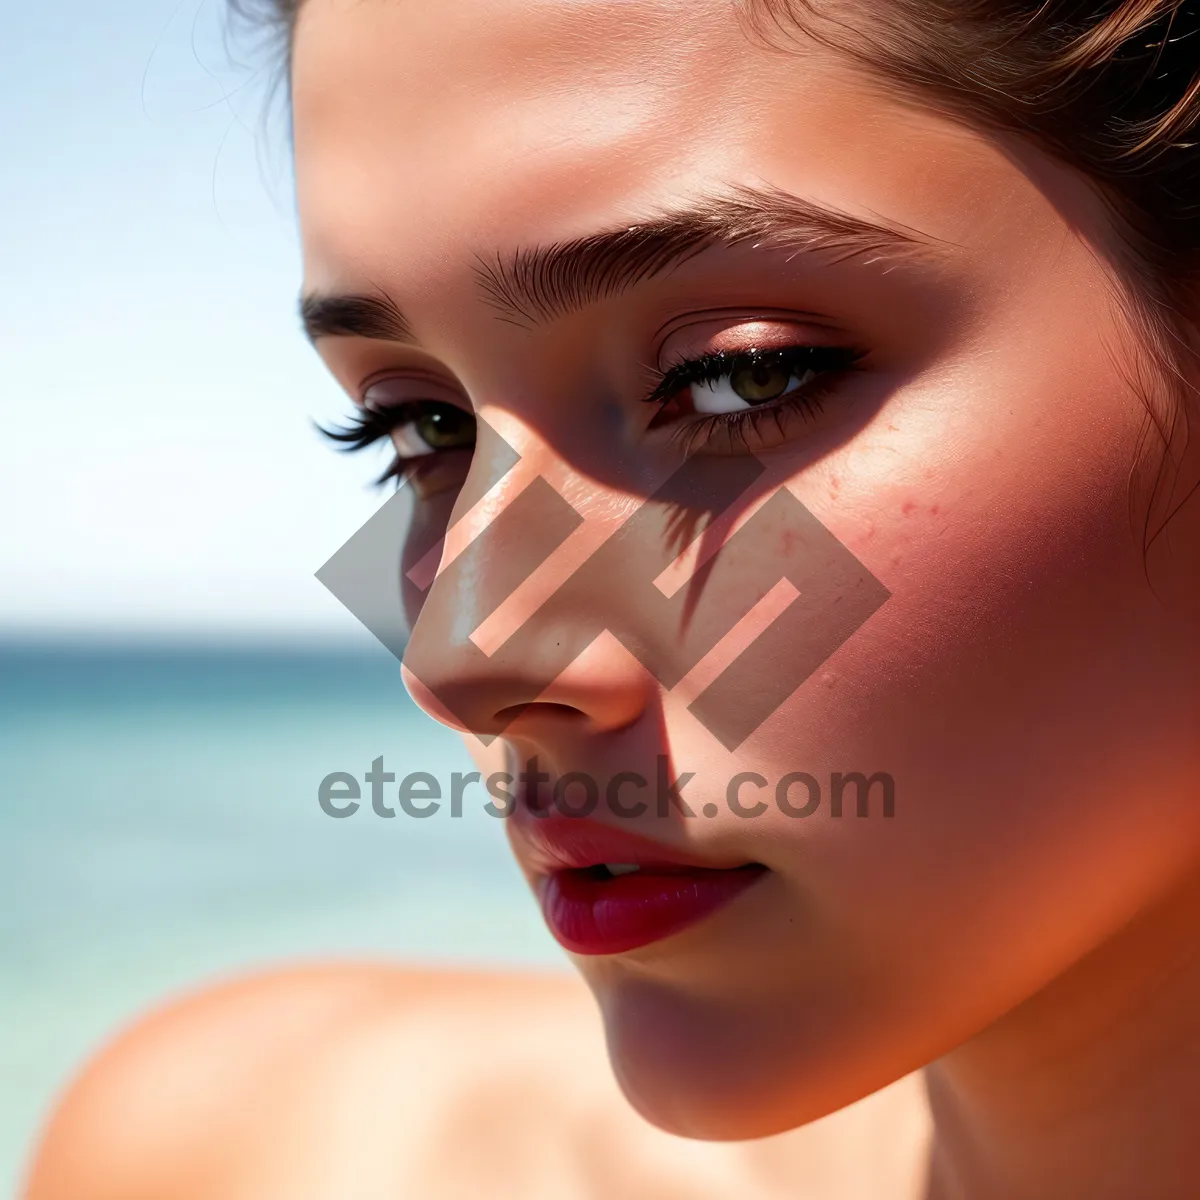 Picture of Radiant Beauty: Alluring Portraiture with Glamorous Makeup